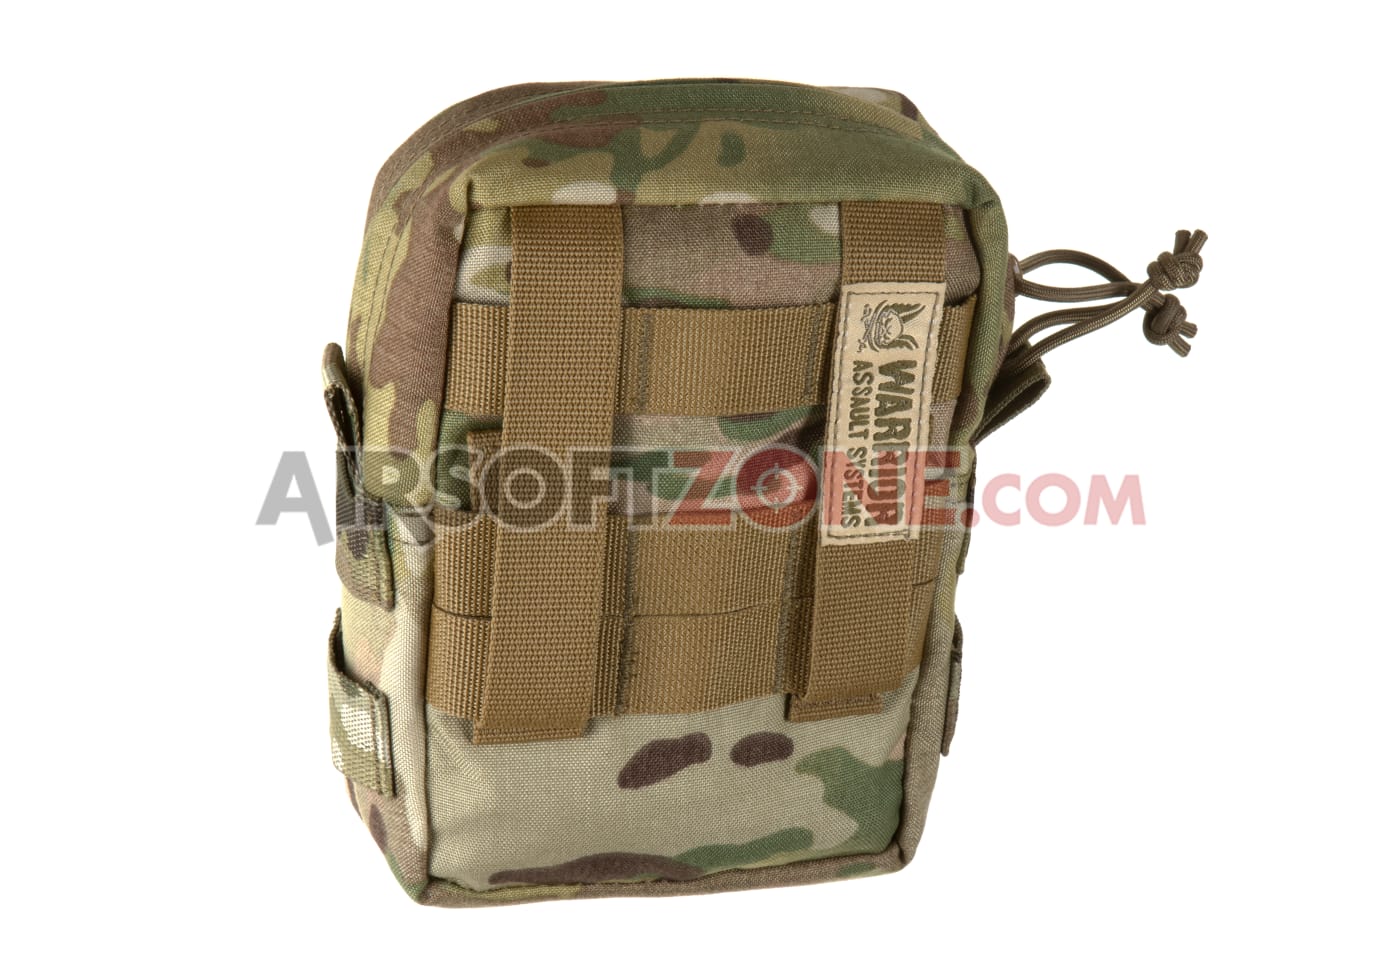 Go Big with a Large Utility MOLLE Pouch Zipped by Warrior